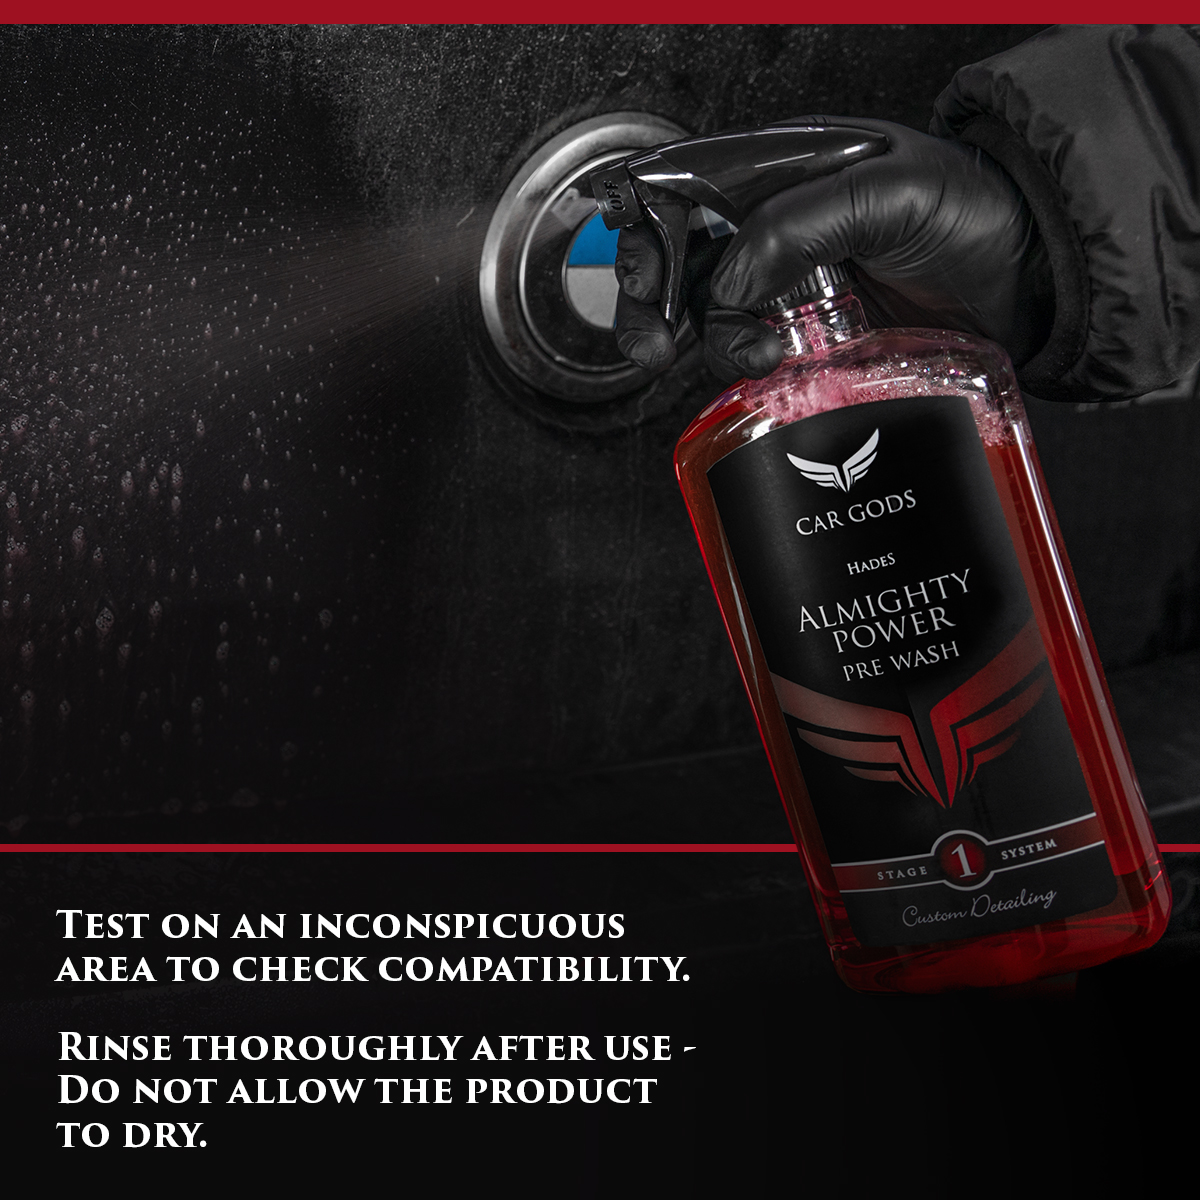 Image: Spraying Car Gods Almighty Power Pre-Wash onto a black car. Text: Test on an inconspicuous area to check compatibility with your vehicle. Rinse thoroughly after use, do not allow the product to dry.